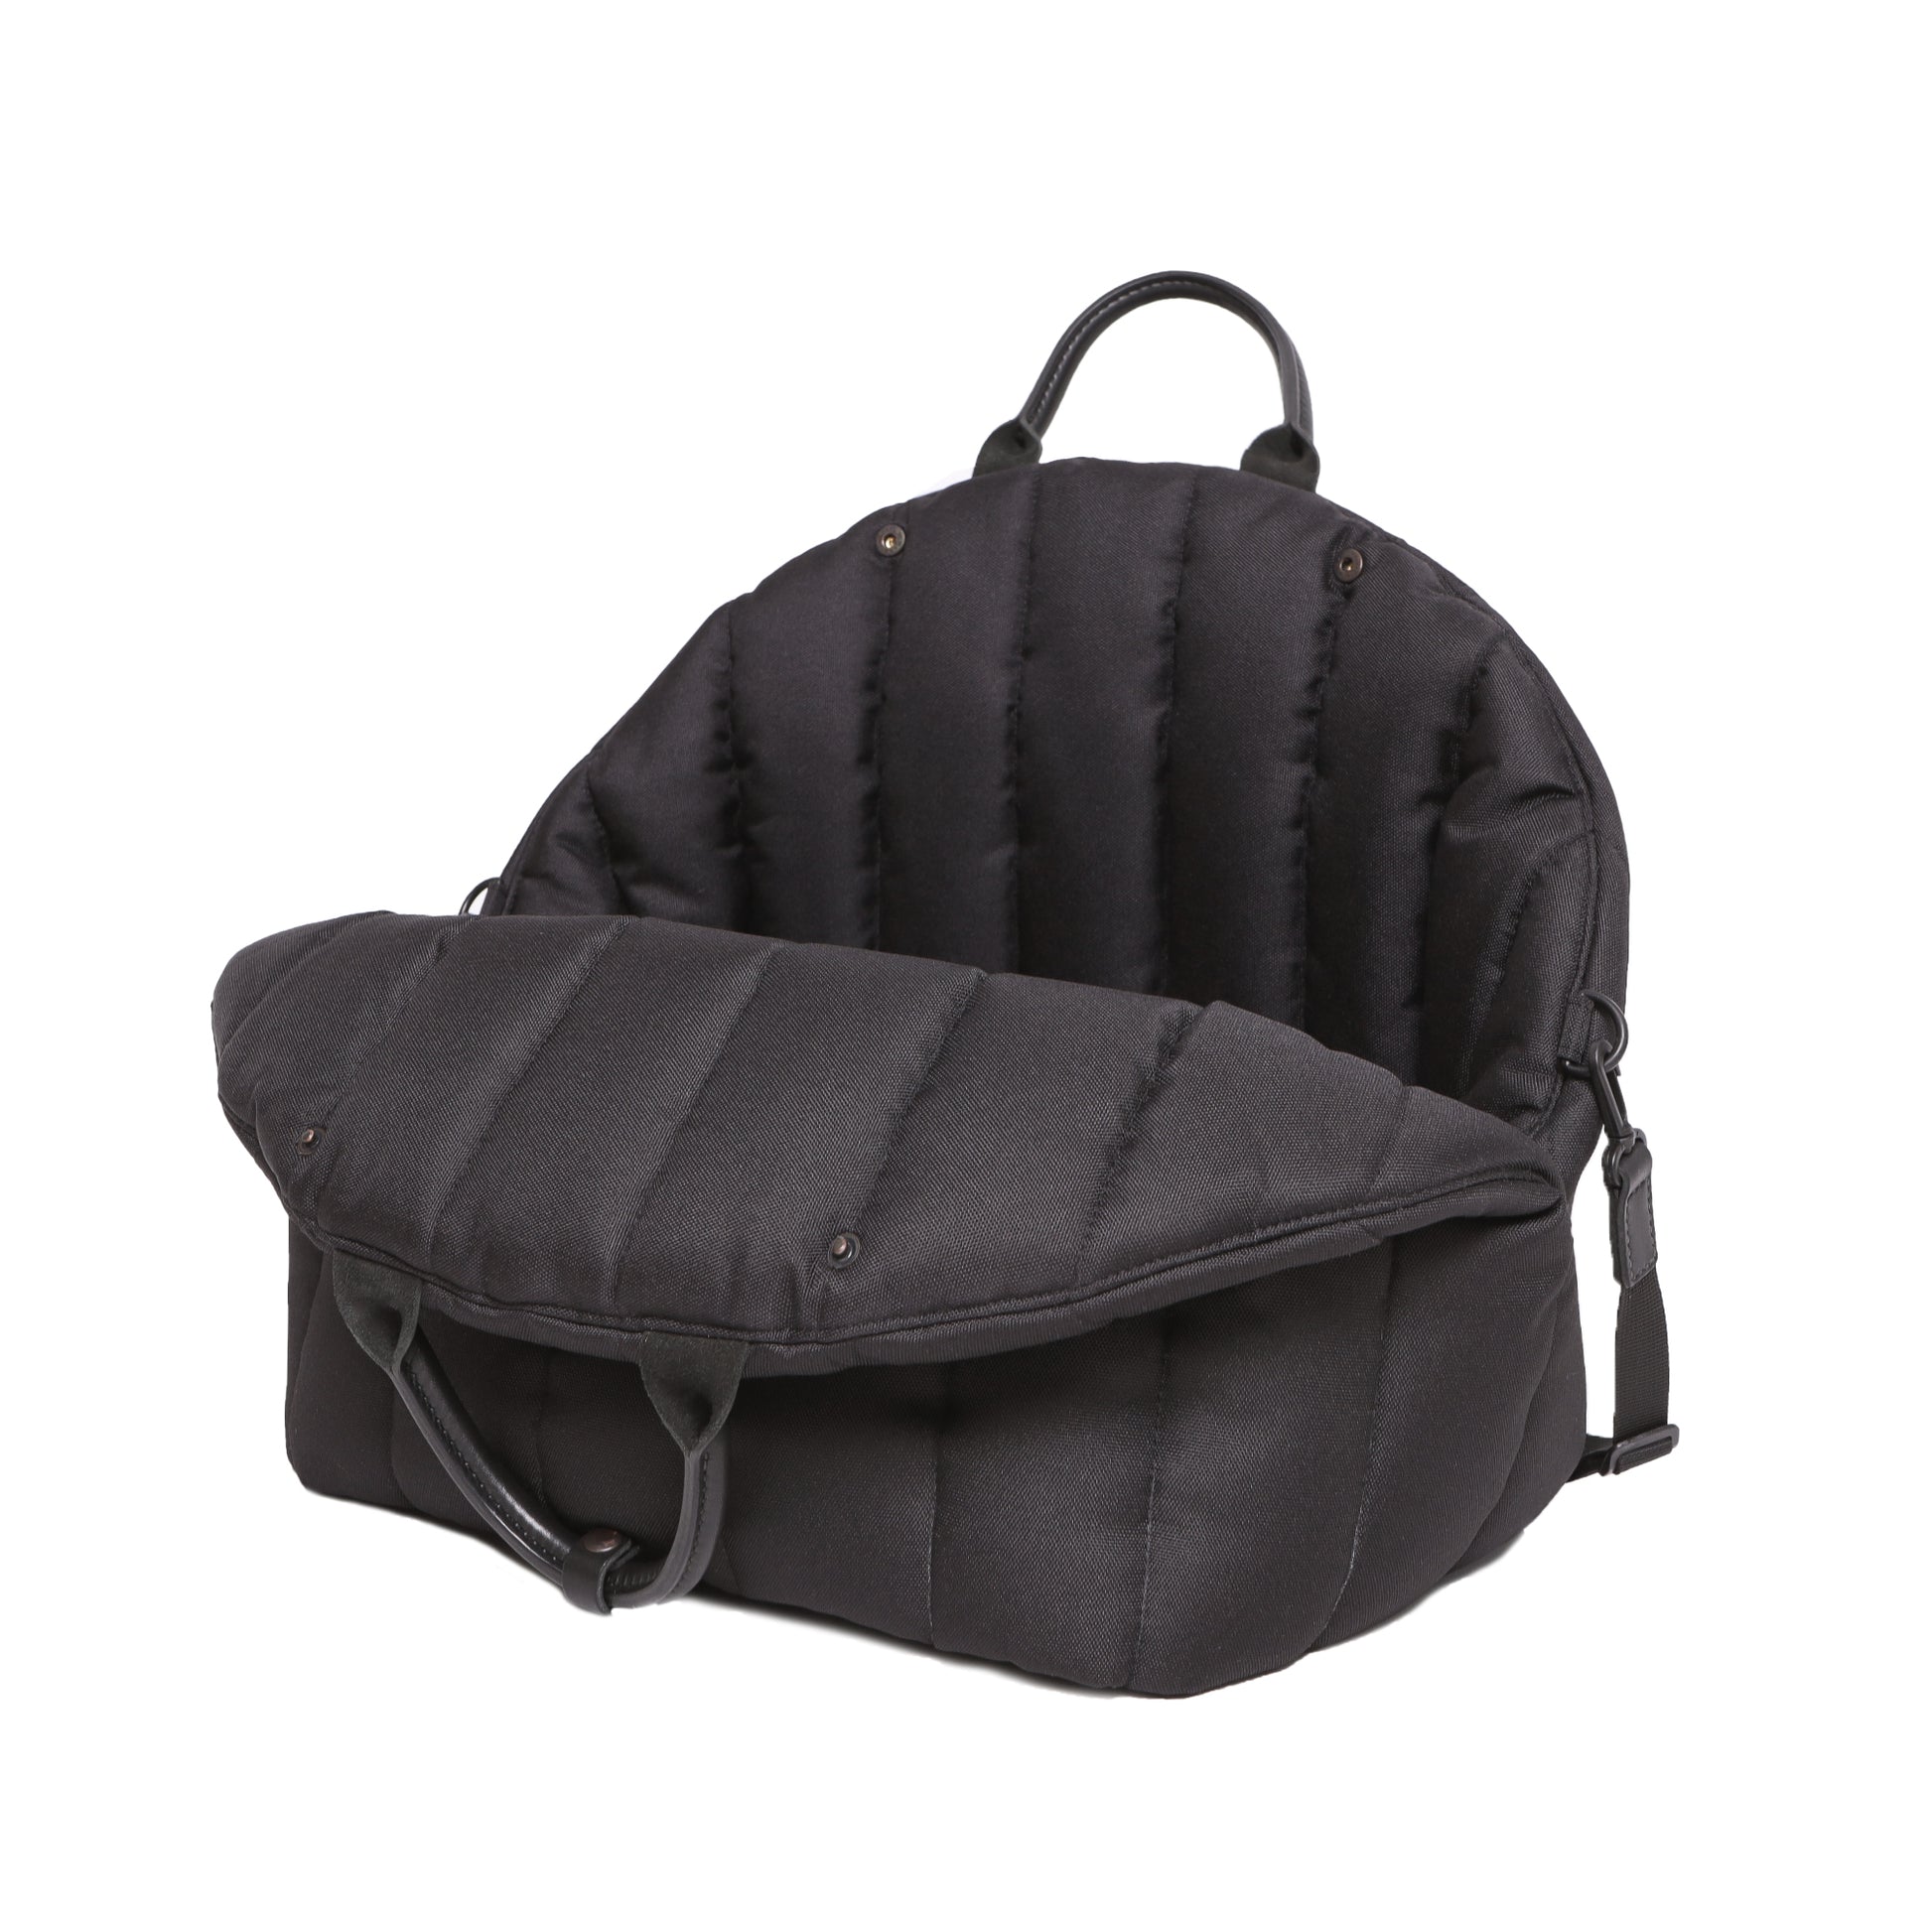 Black Car Seat for Pets: The Perfect Blend of Style and Functionality